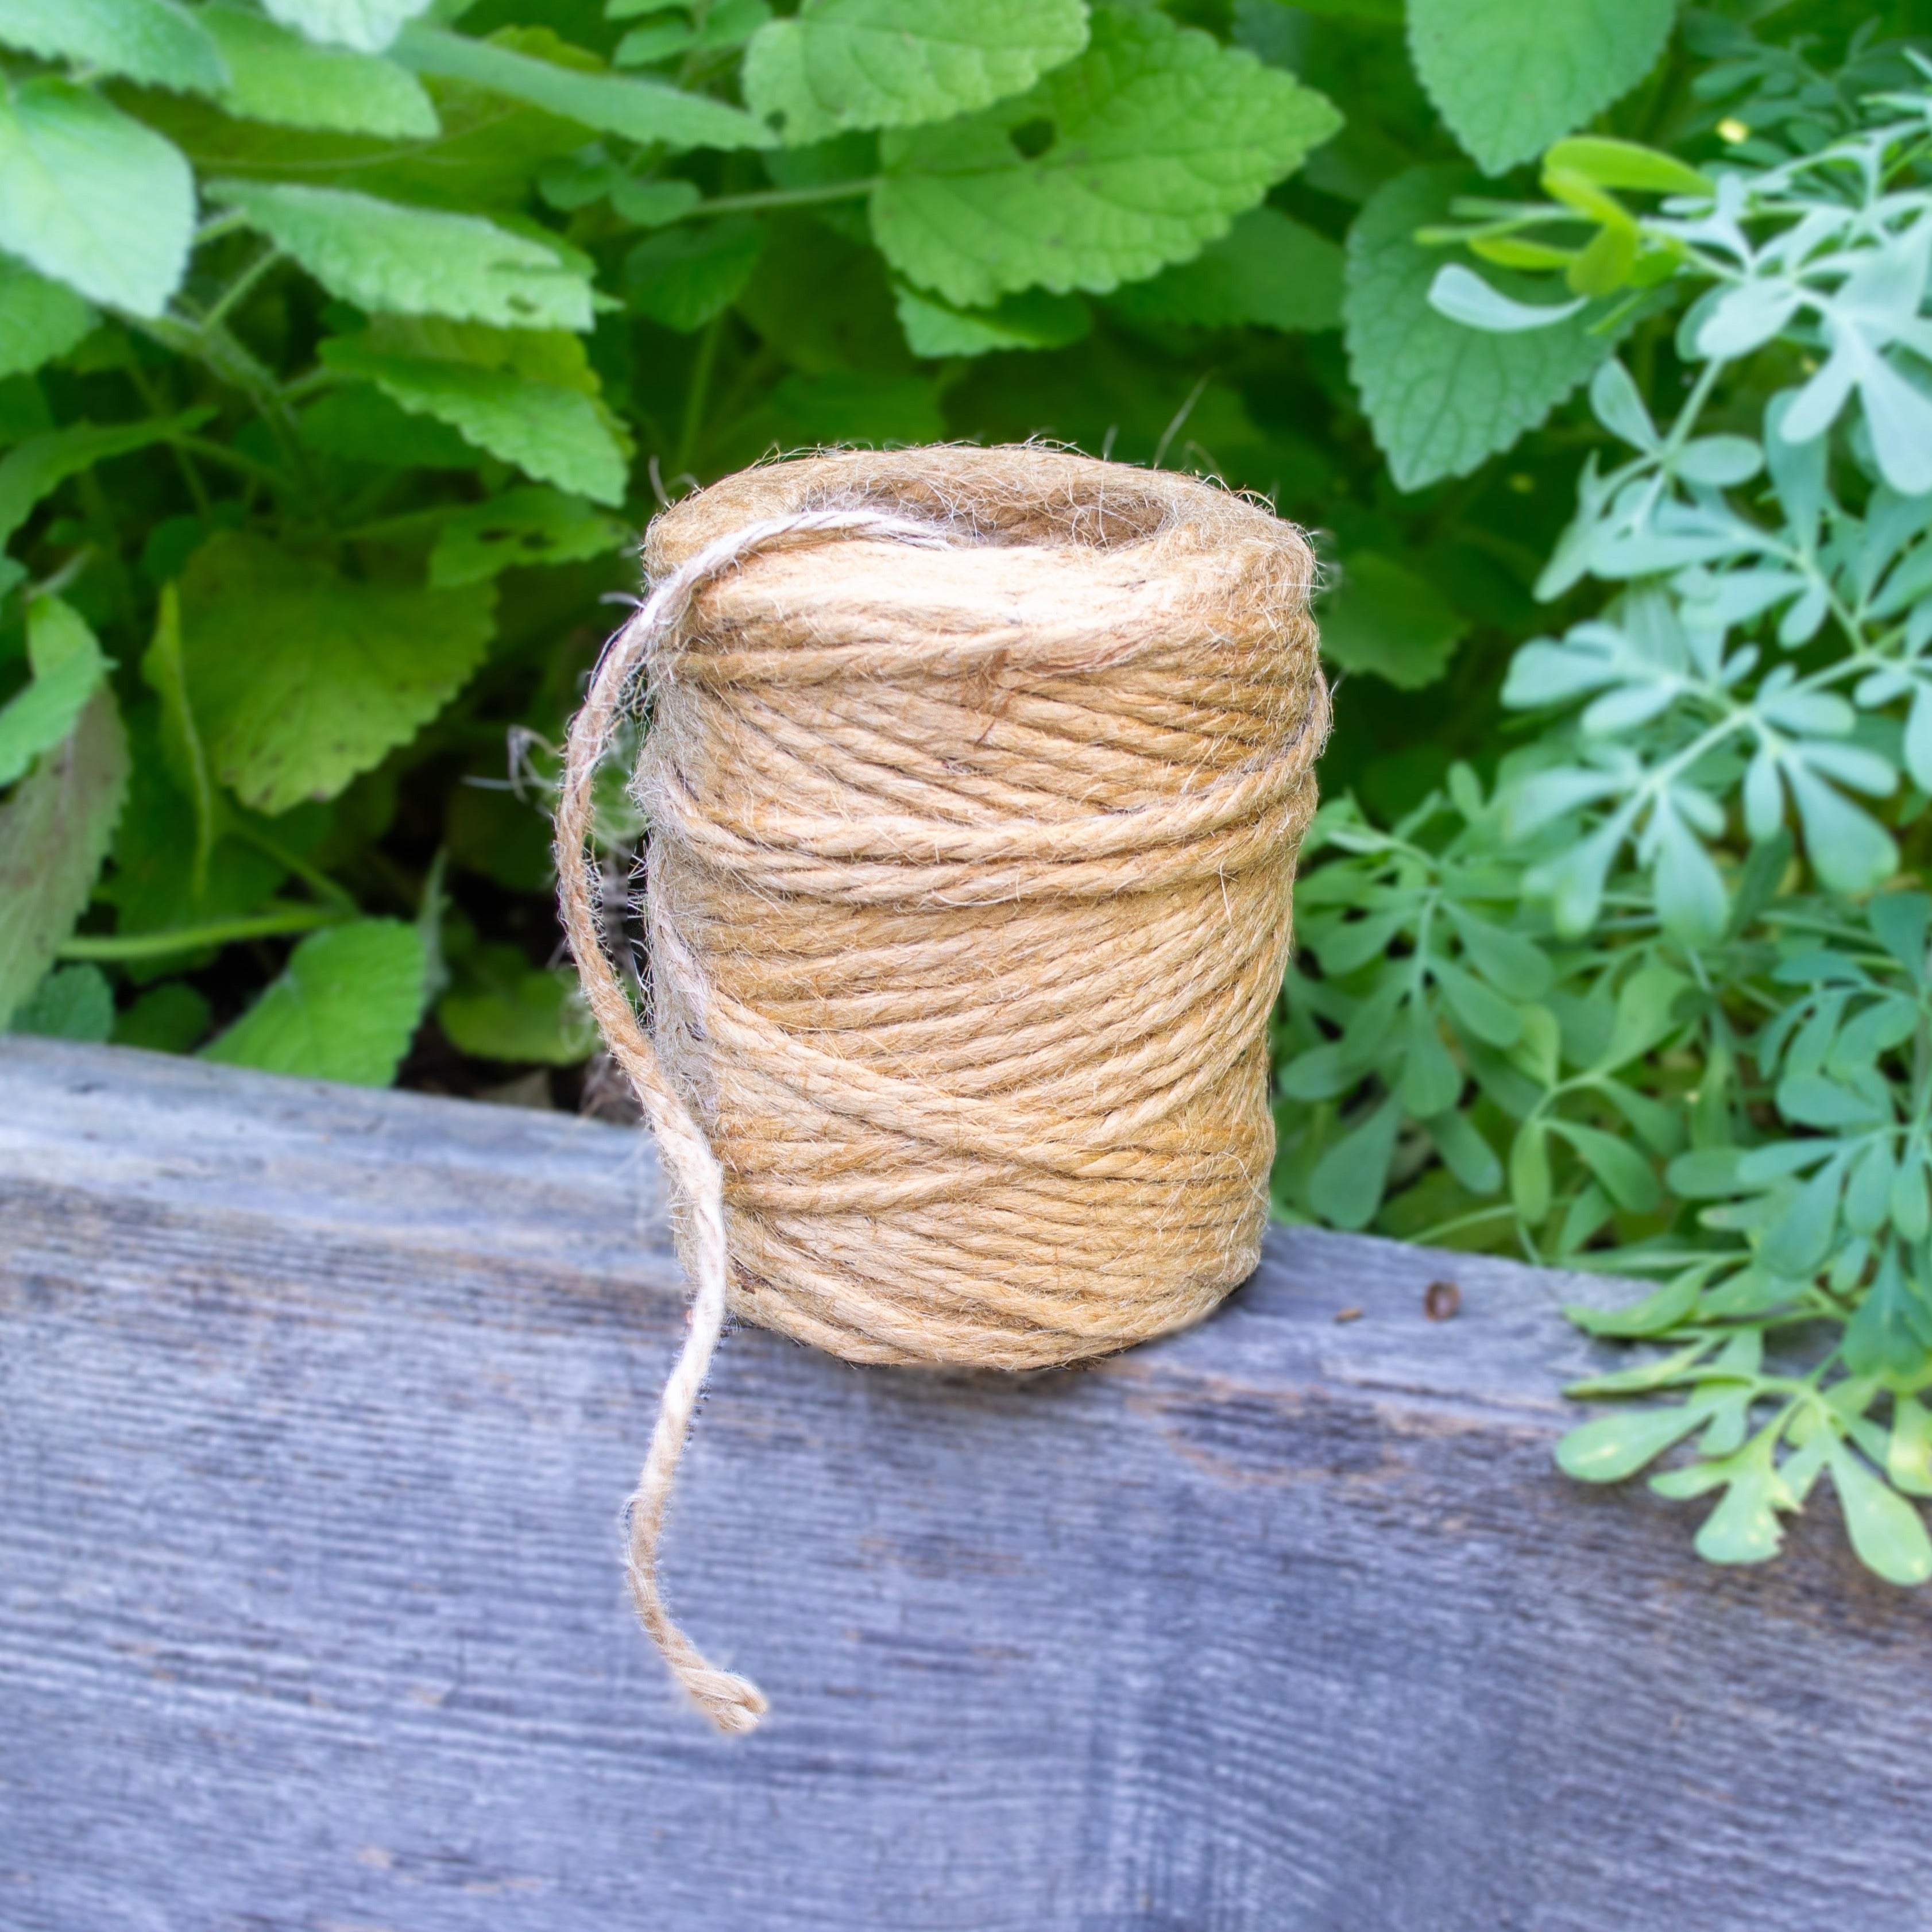 3mm Natural Jute String Twisted Jute Twine for Agriculture Garden